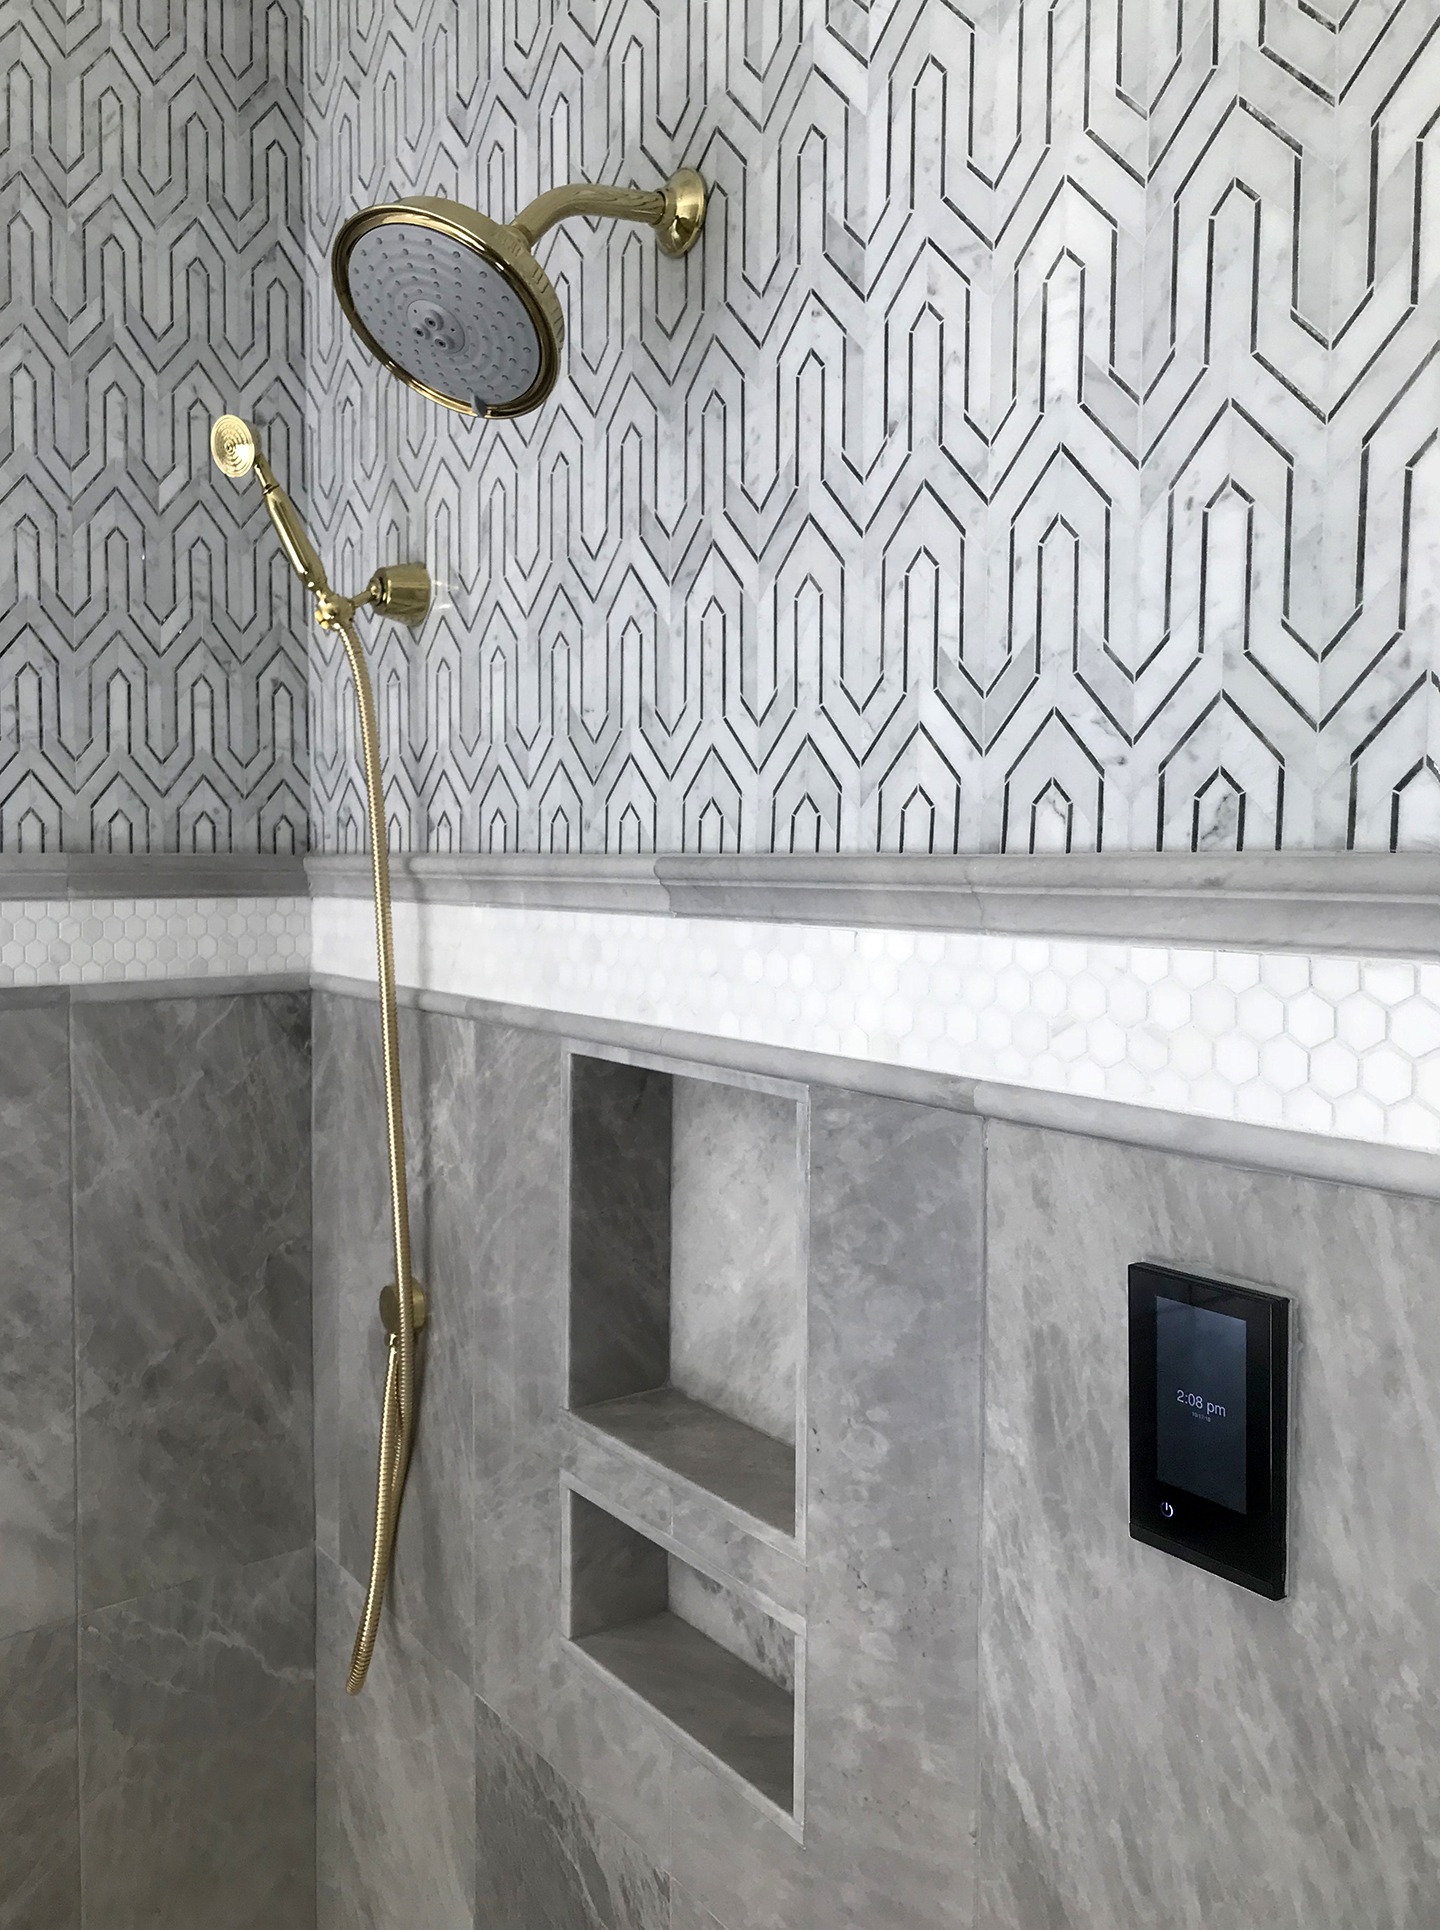 A shower with patterned tile.